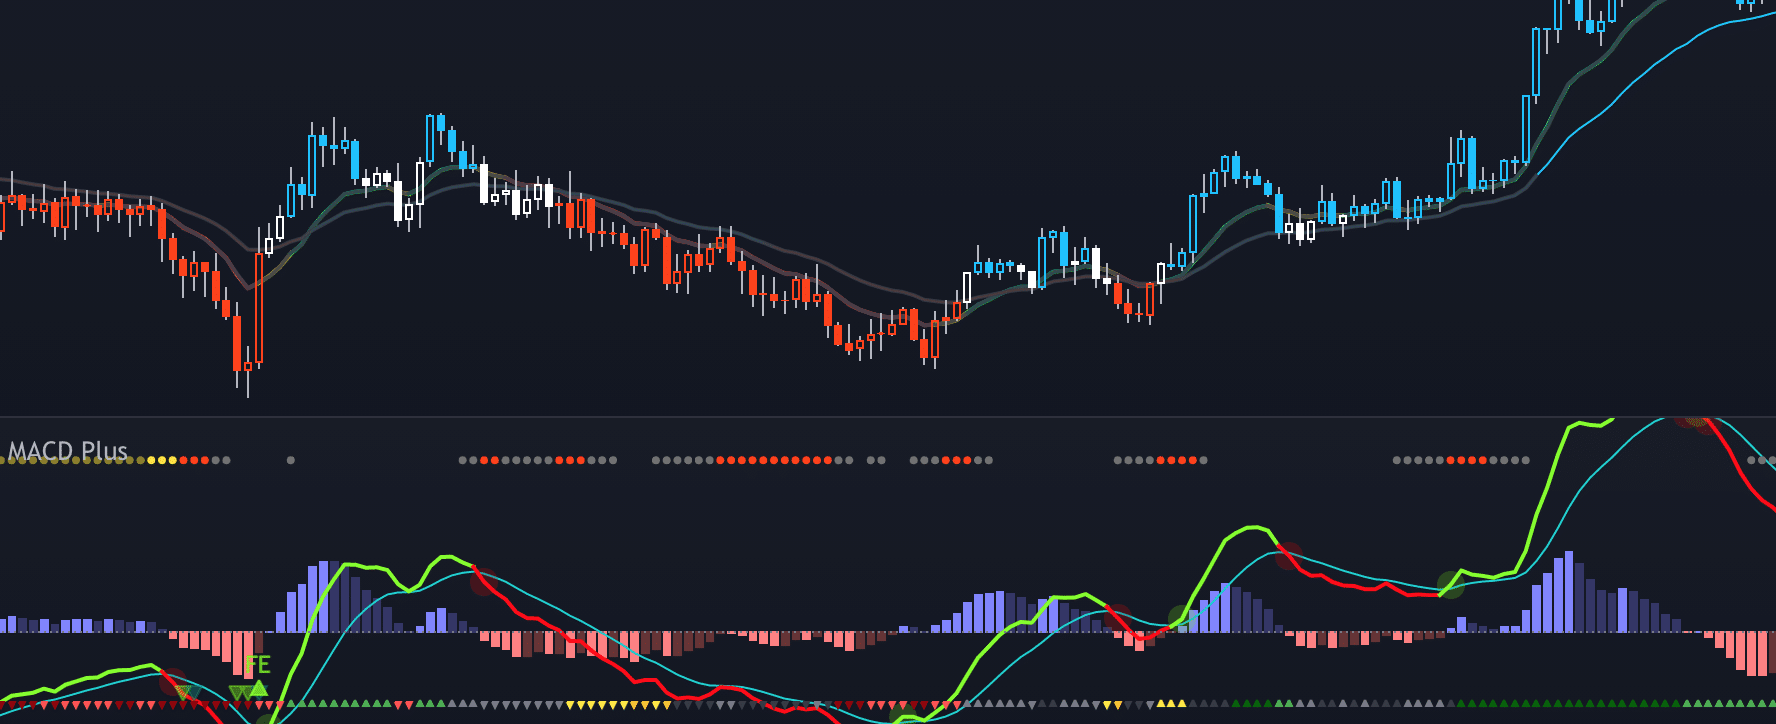 MACD and Candle Charts Used Together